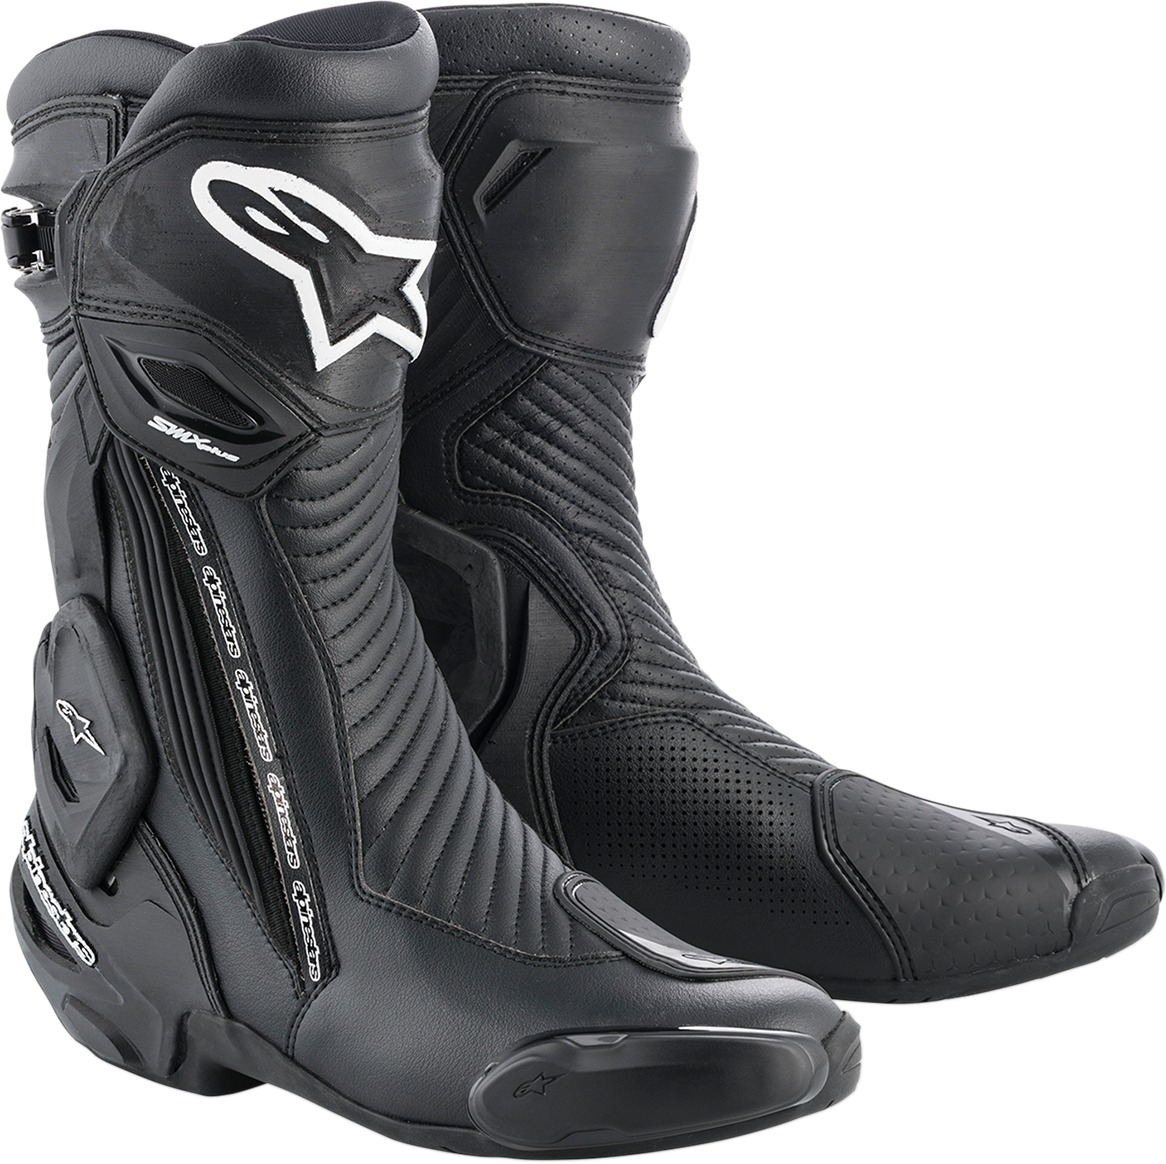 SMX Plus Street Riding Boots Black US 12 - Click Image to Close